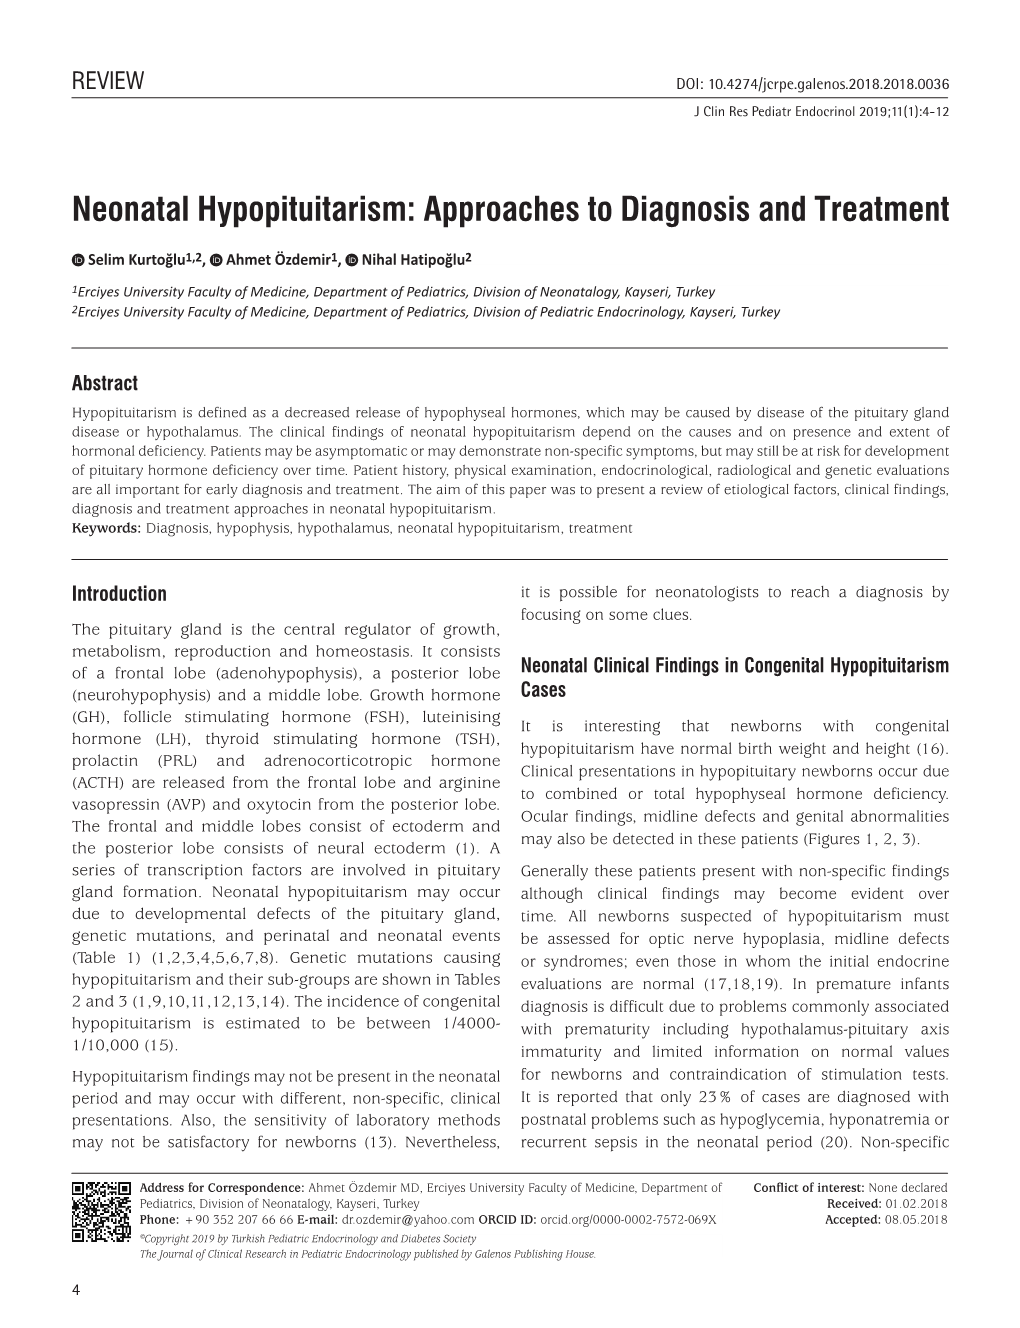 Neonatal Hypopituitarism: Approaches to Diagnosis and Treatment